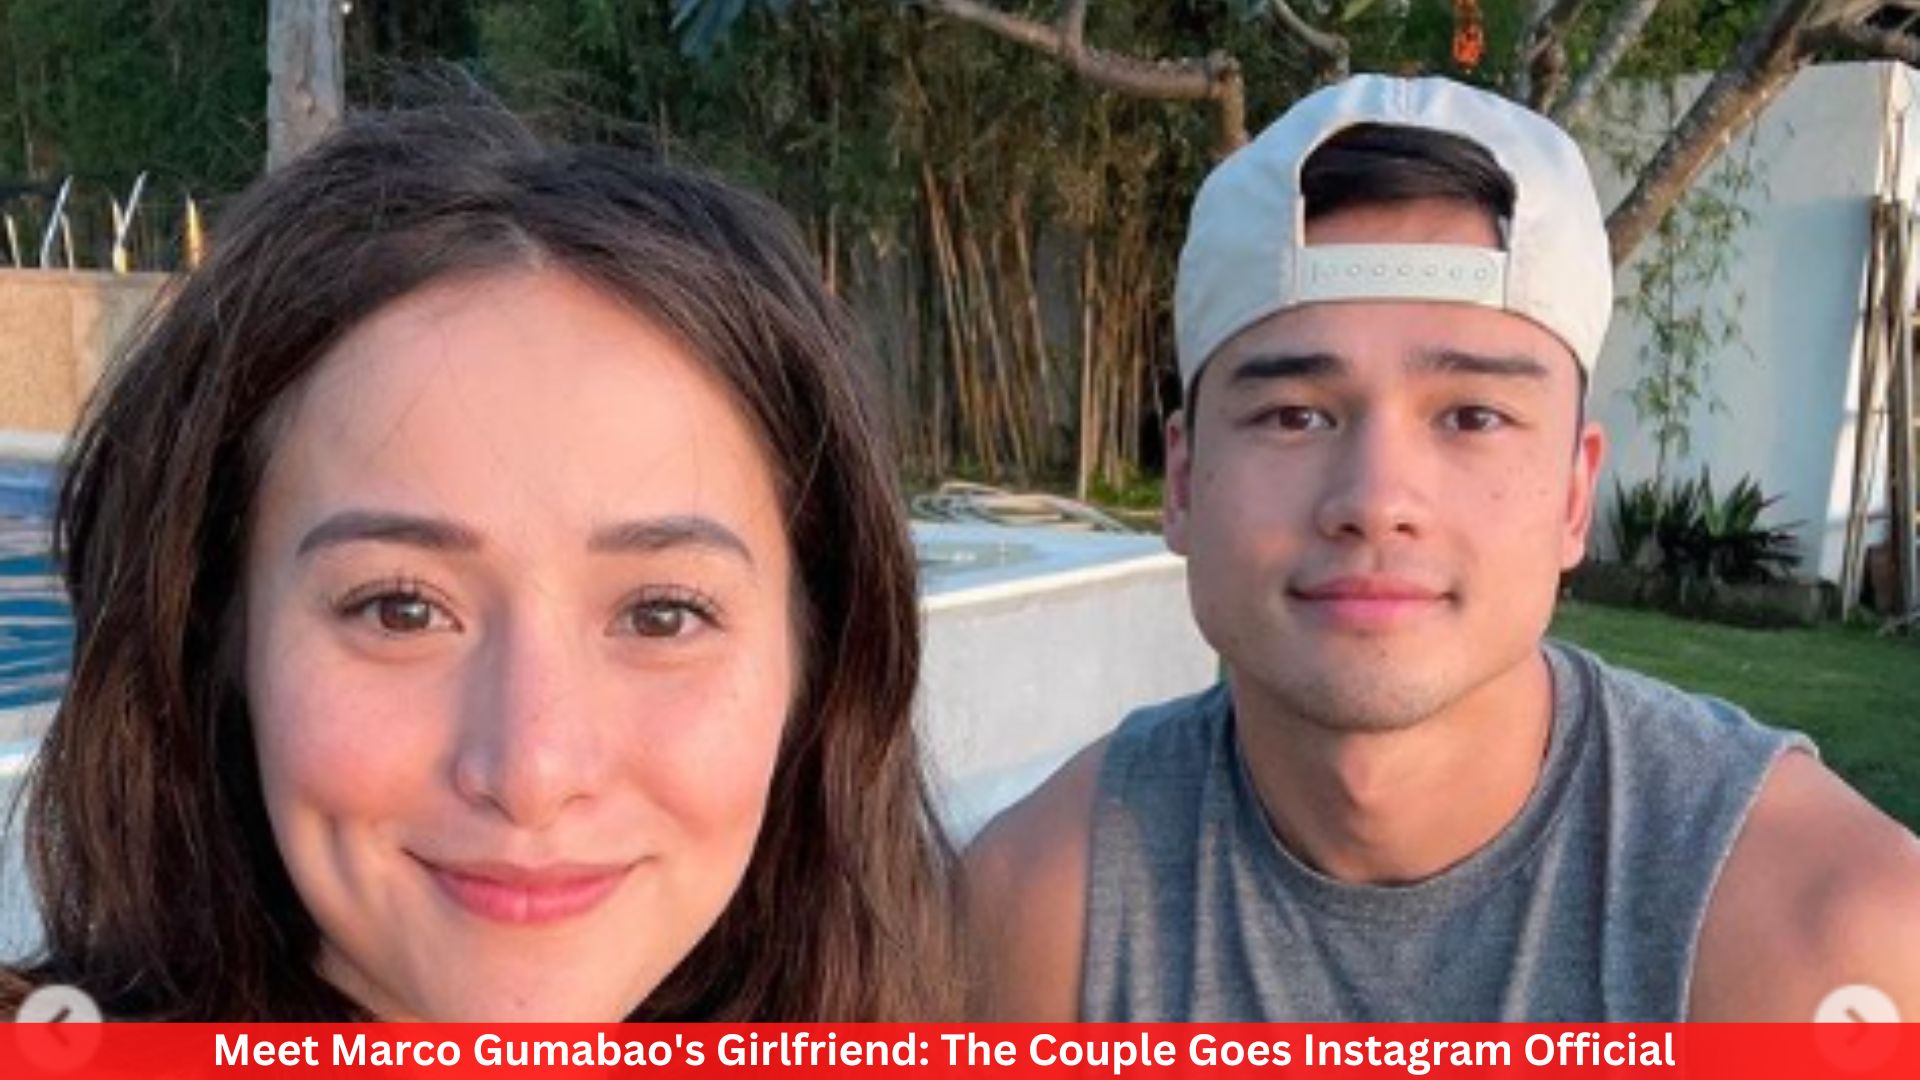 Meet Marco Gumabao's Girlfriend: The Couple Goes Instagram Official